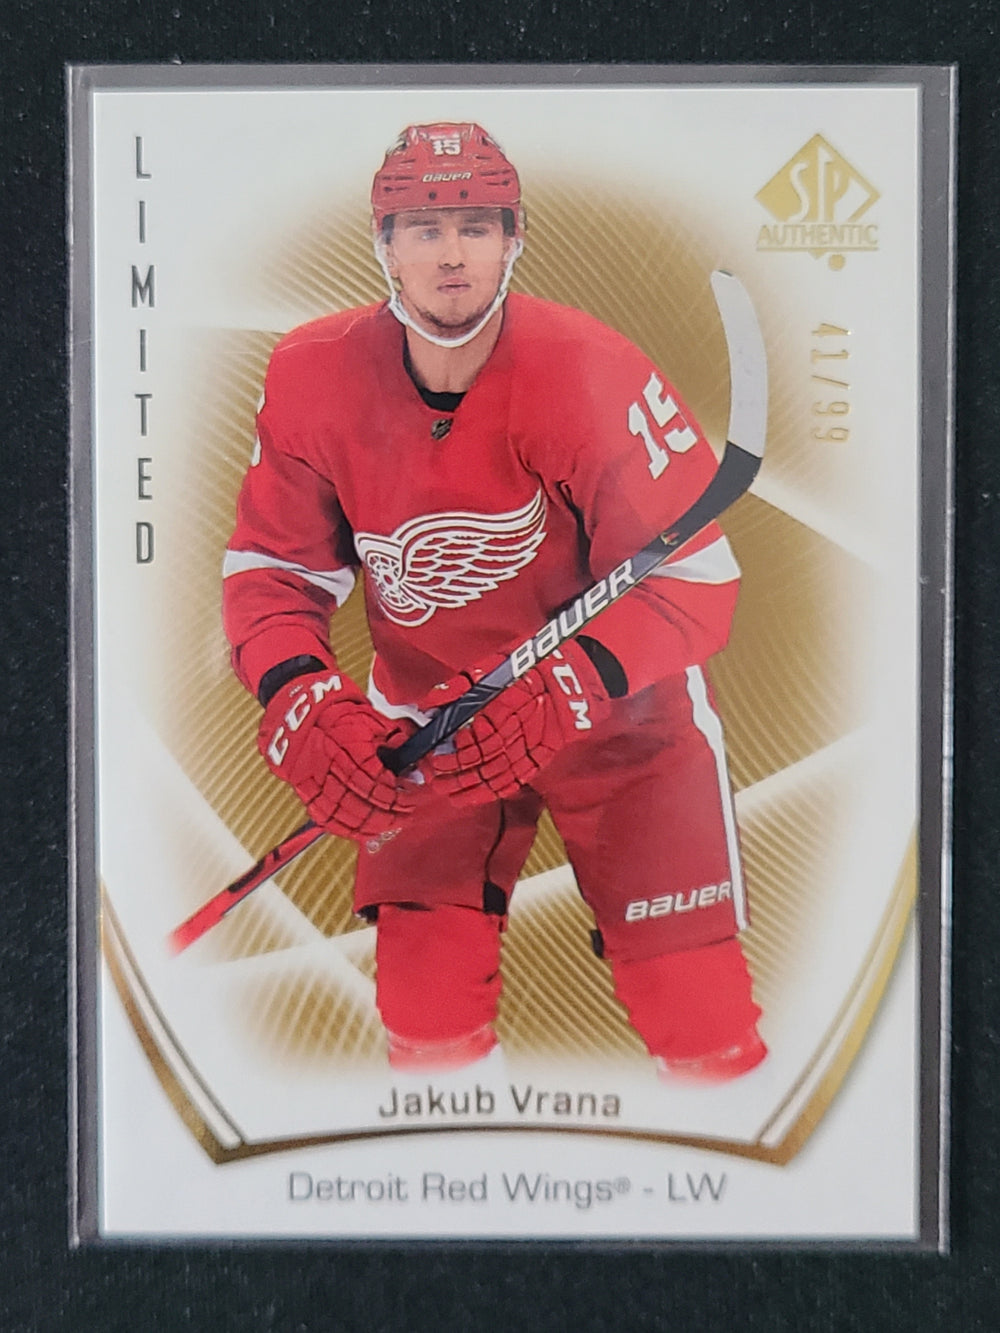 2021-22 SP Authentic Limited #13 Jakub Vrana Detroit Red Wings 41/99